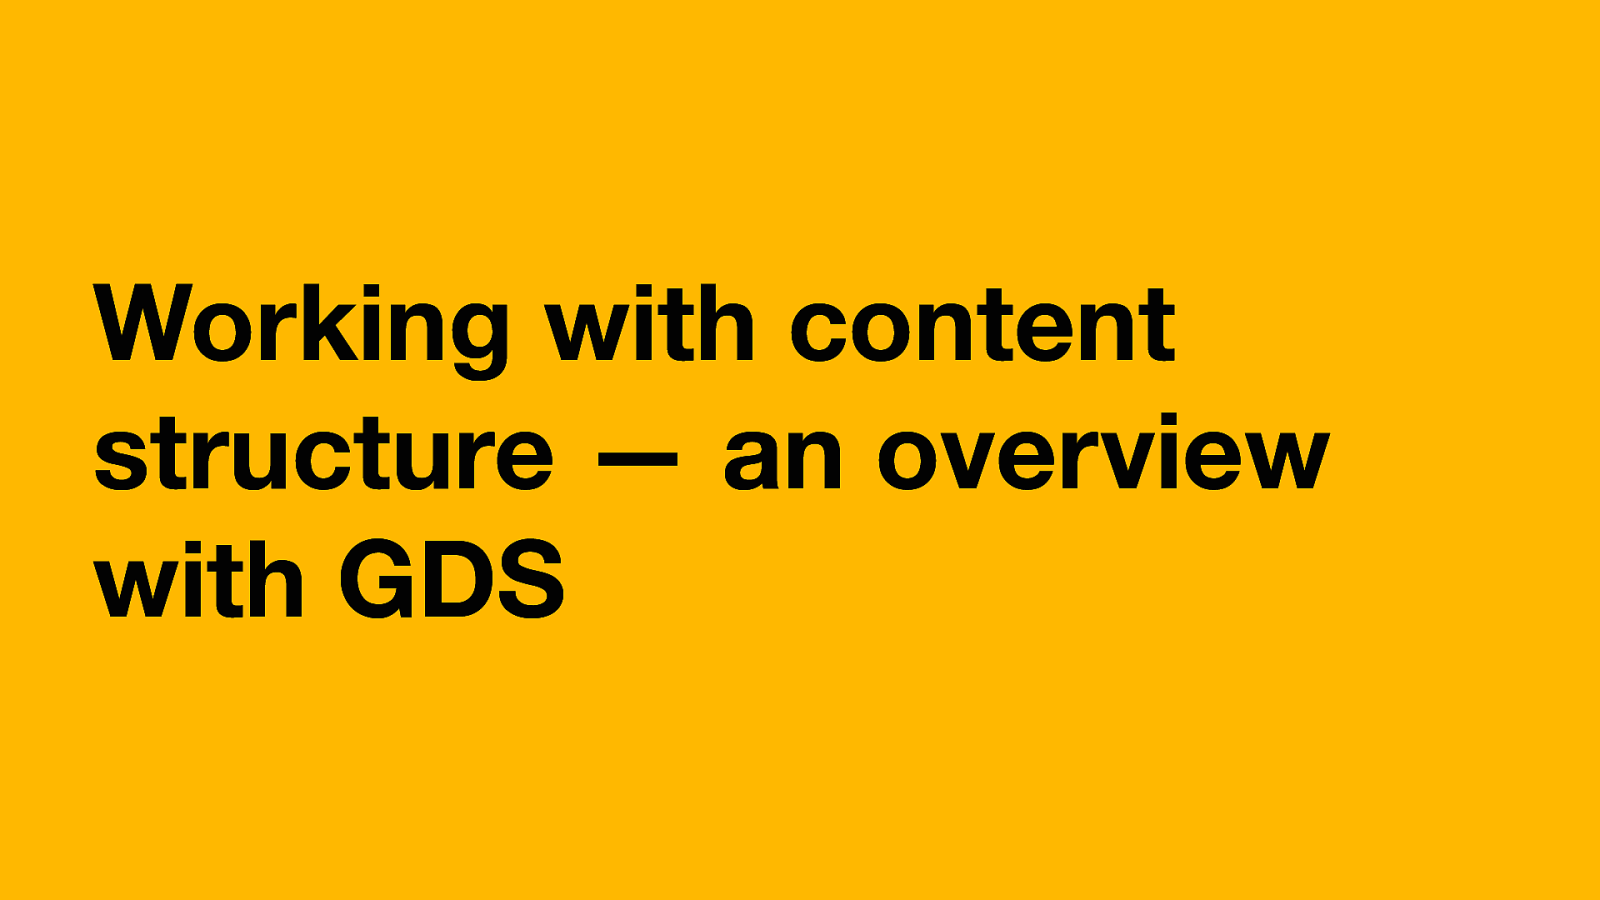 Working with content structure — an overview with GDS